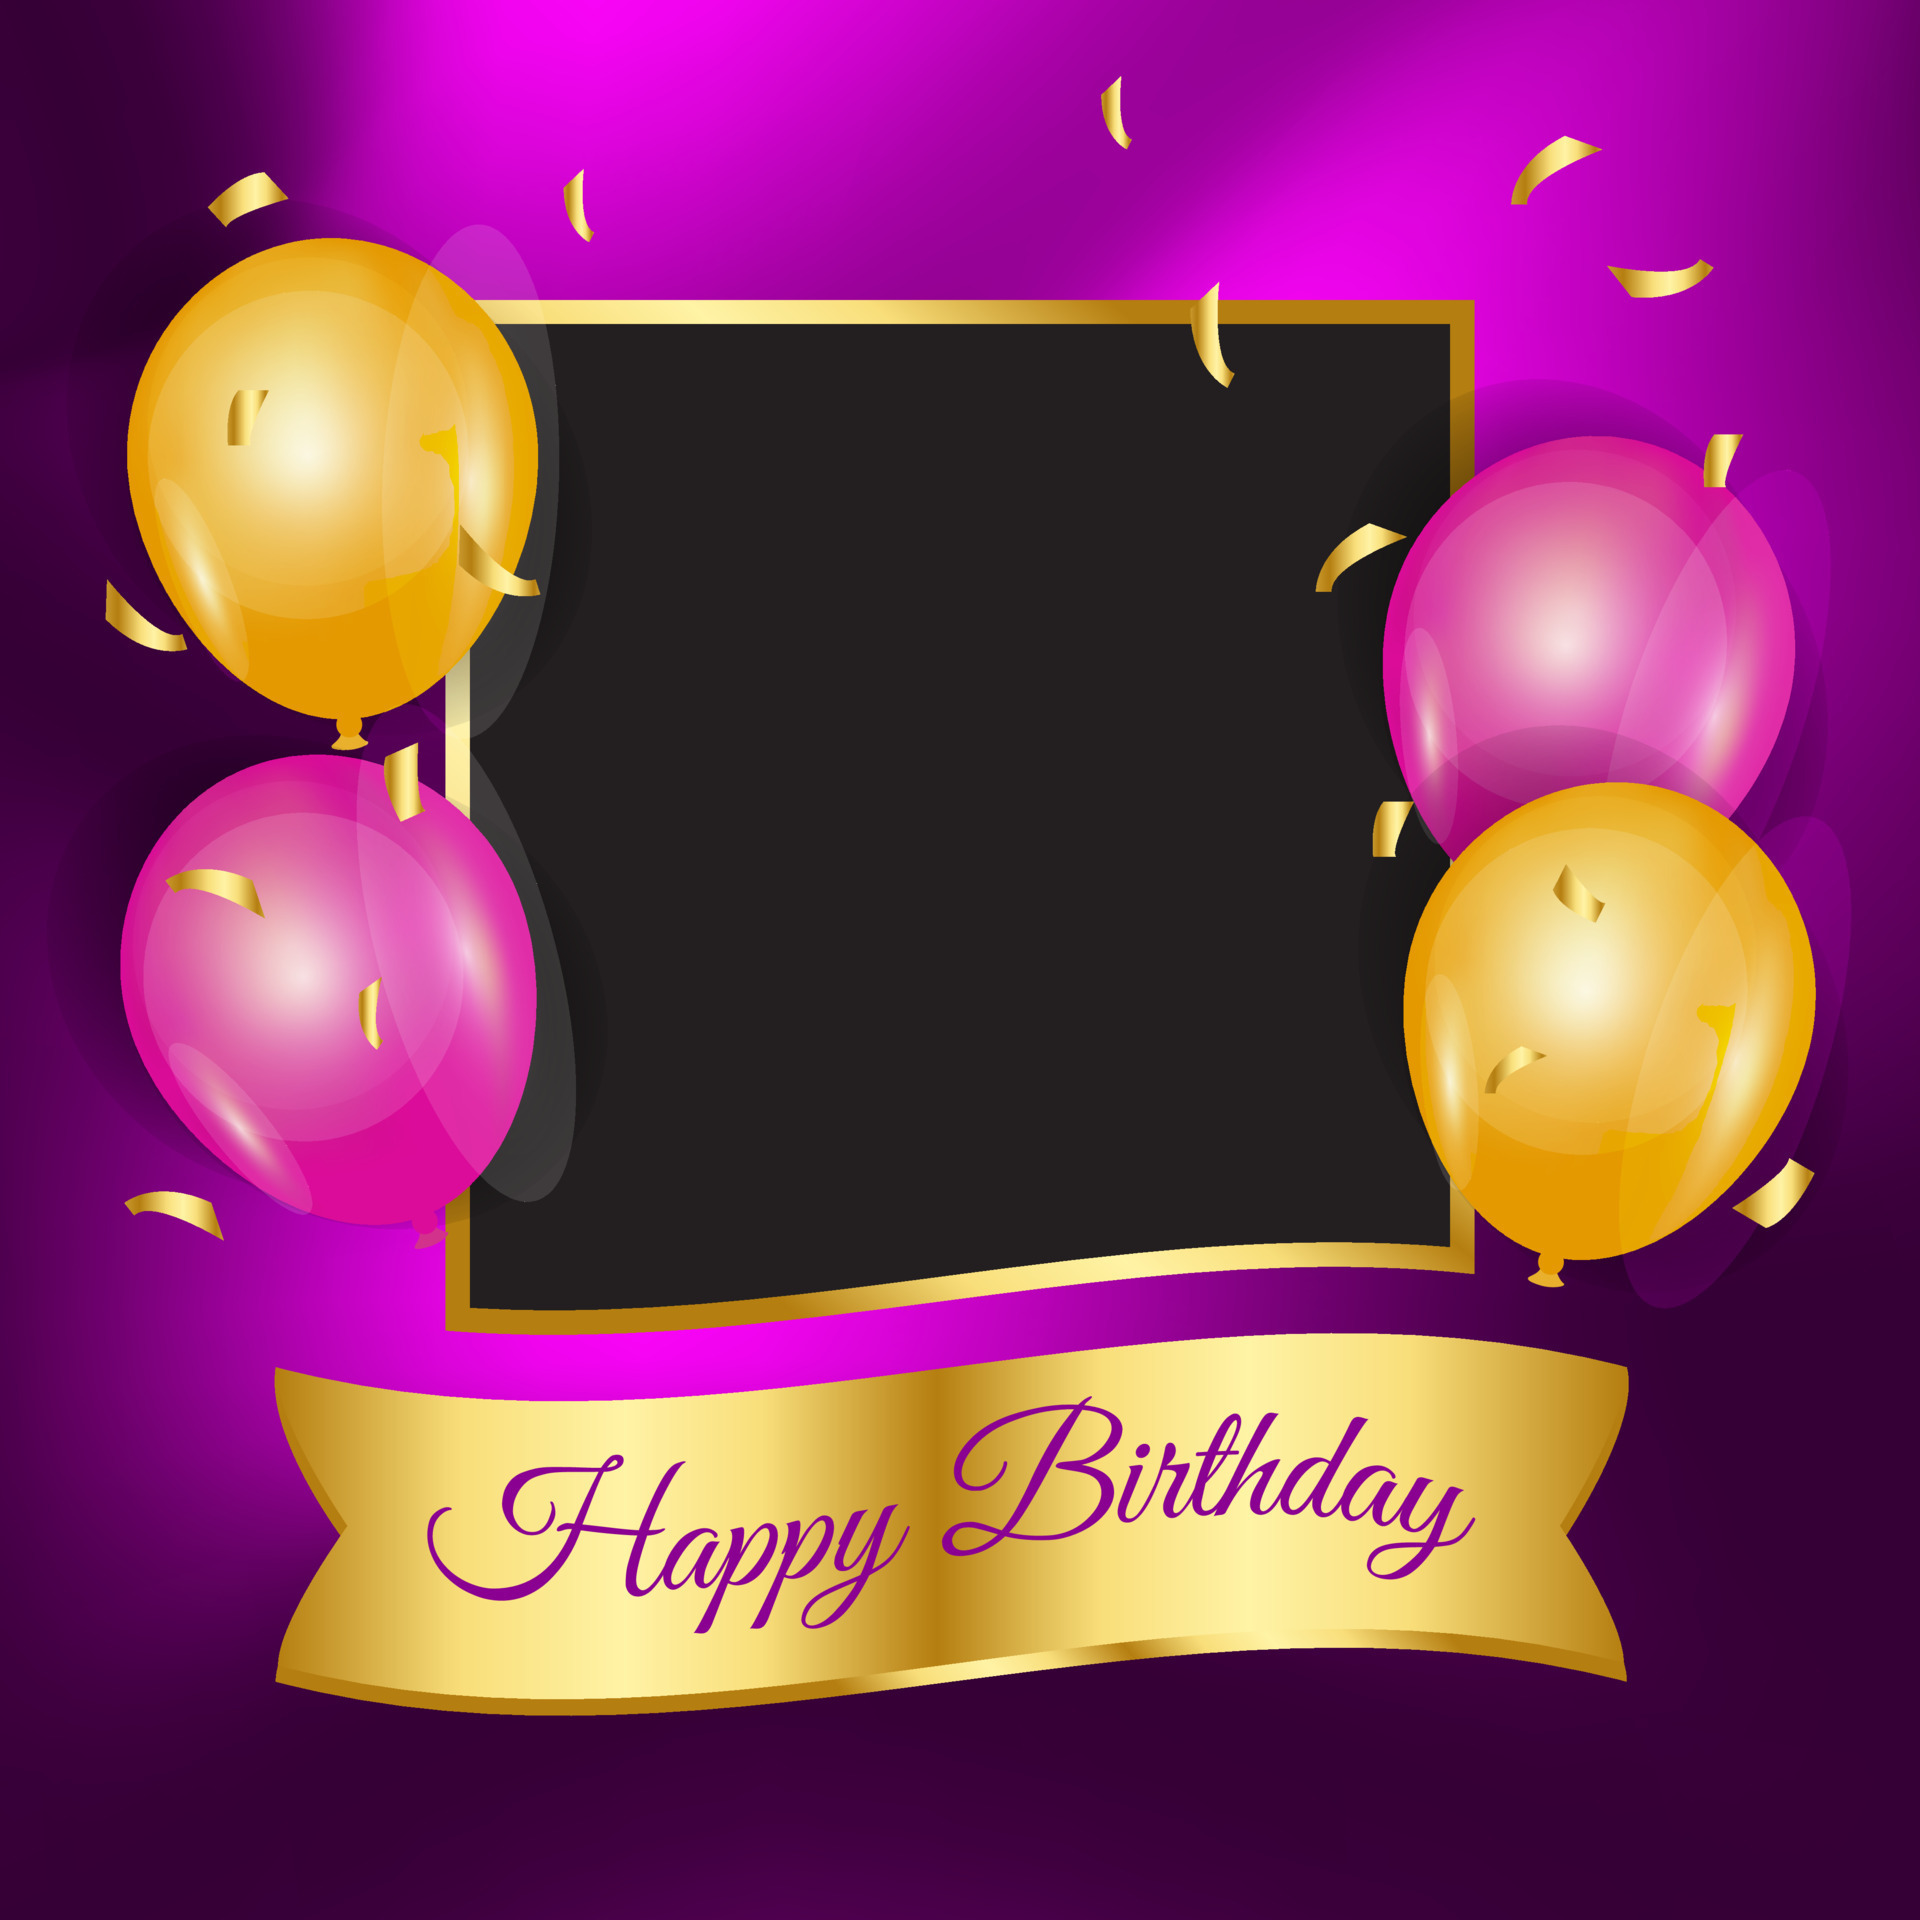 Happy birthday background with balloons cap and photo frame 9286647 ...